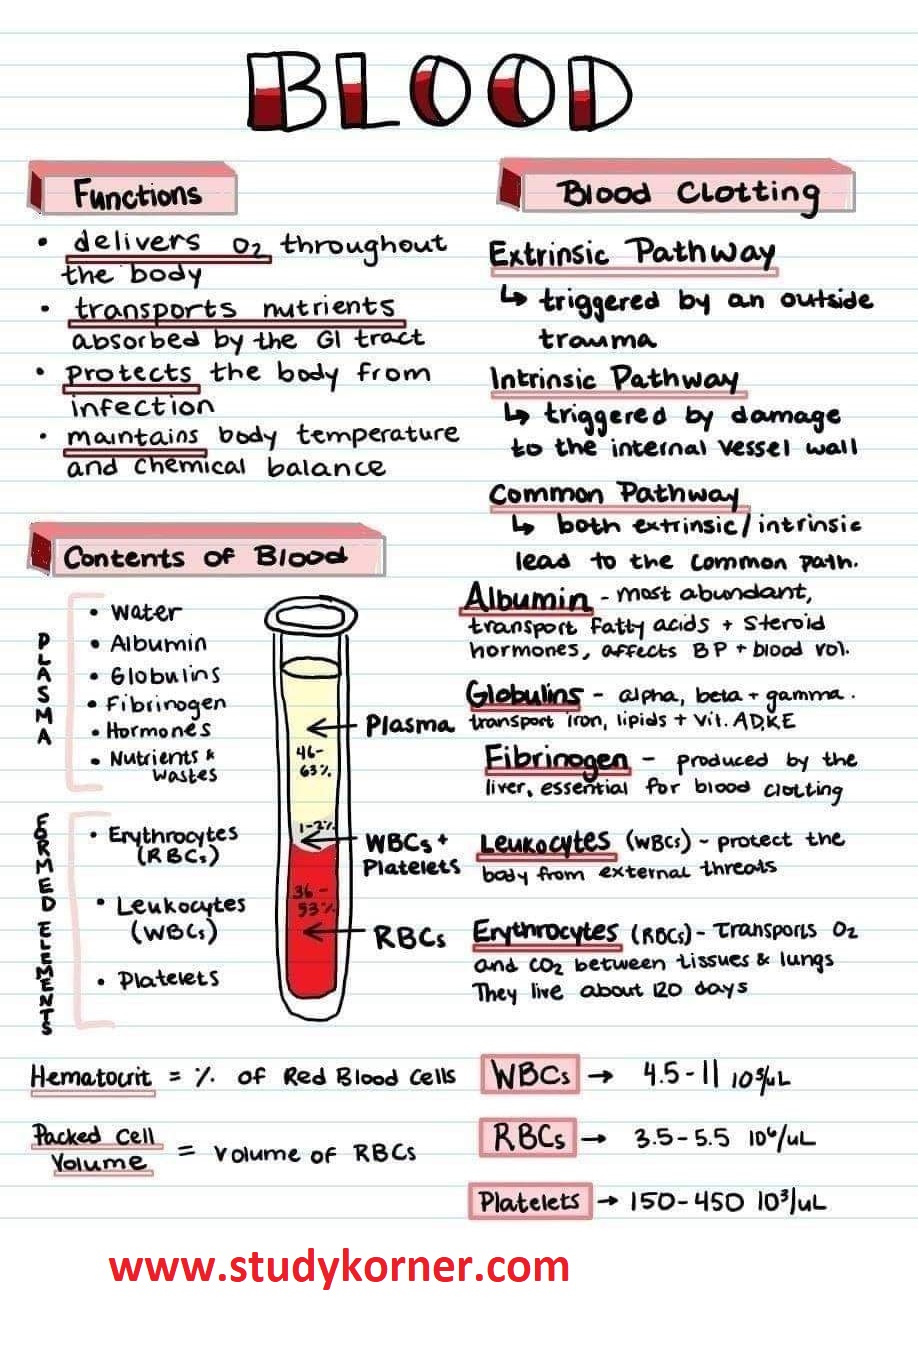 Blood Contents and Vocabulary List